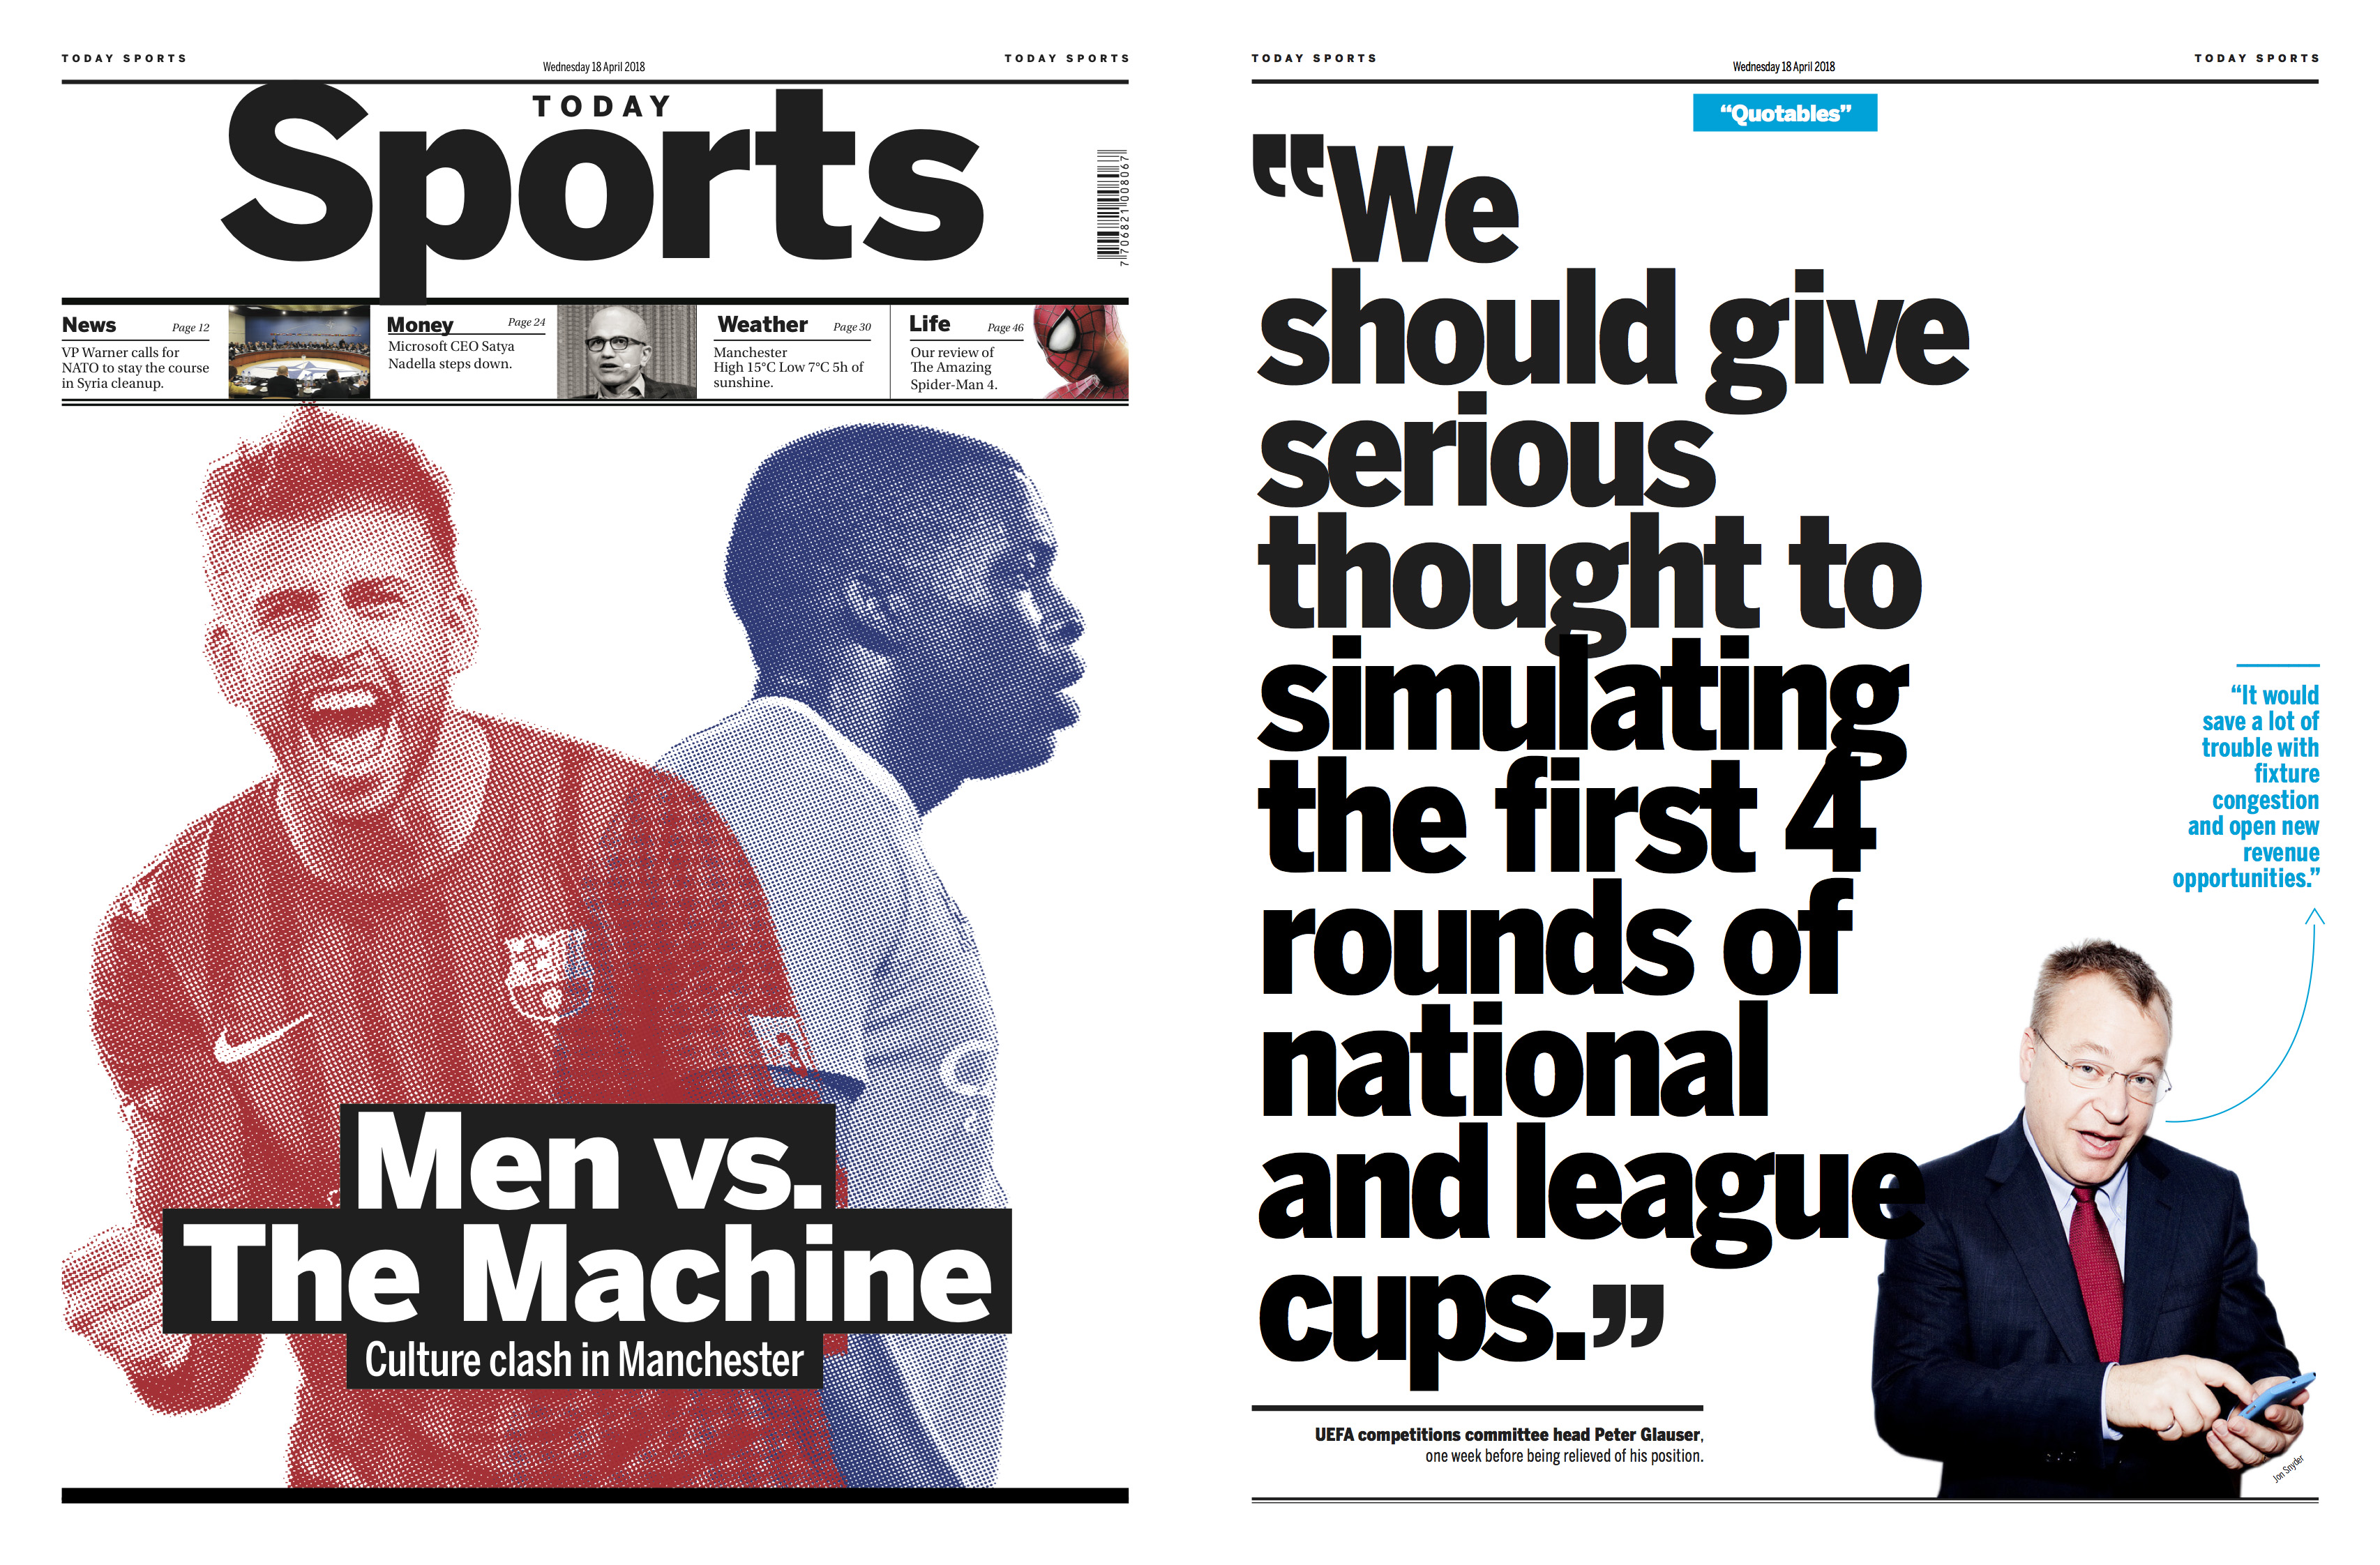 Two pages from Winning Formula a Design Fiction newspaper from a possible future of sport.